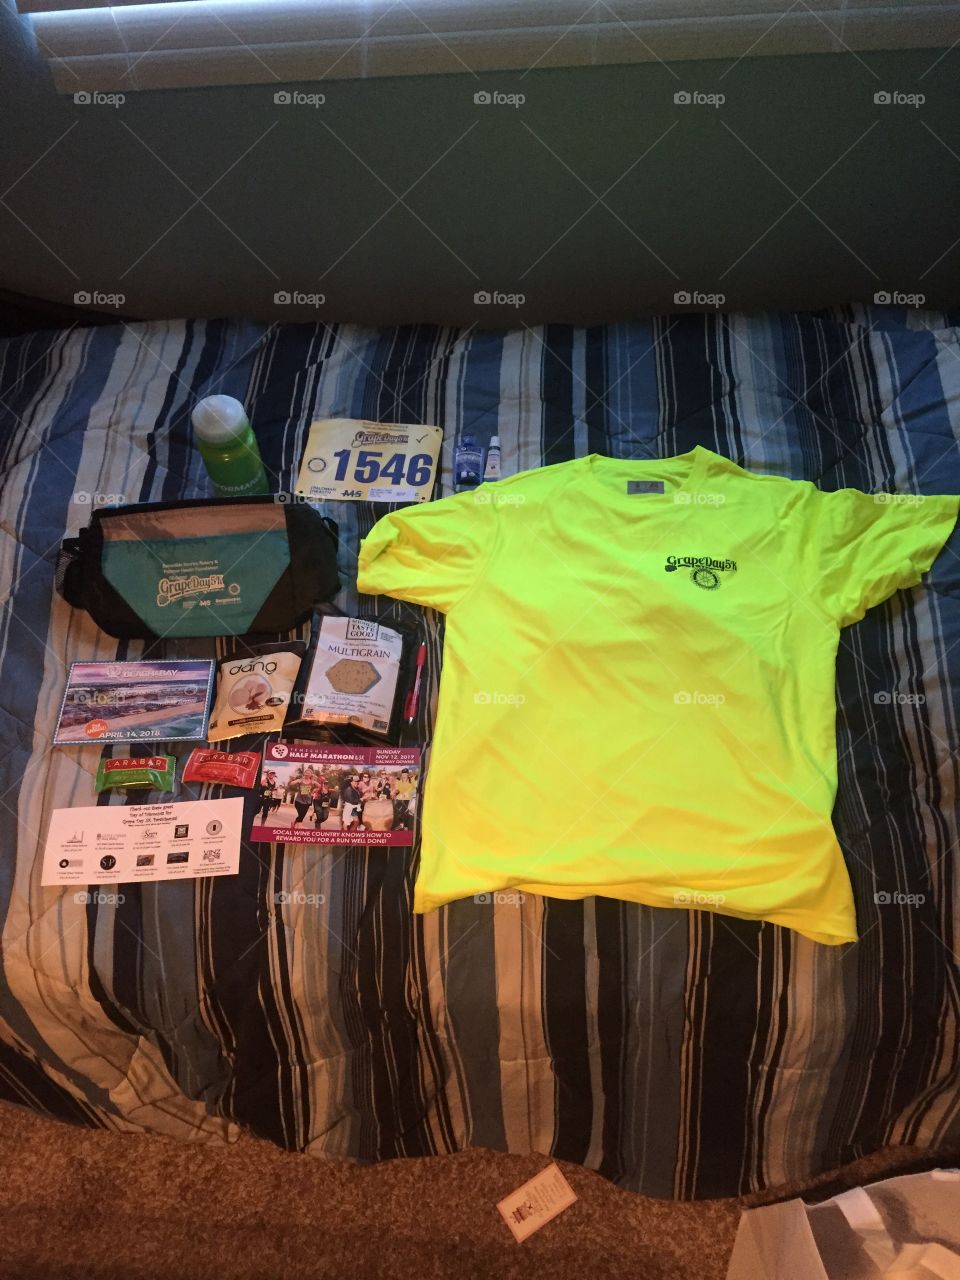 Goodies I got at the Grape Day 5k expo